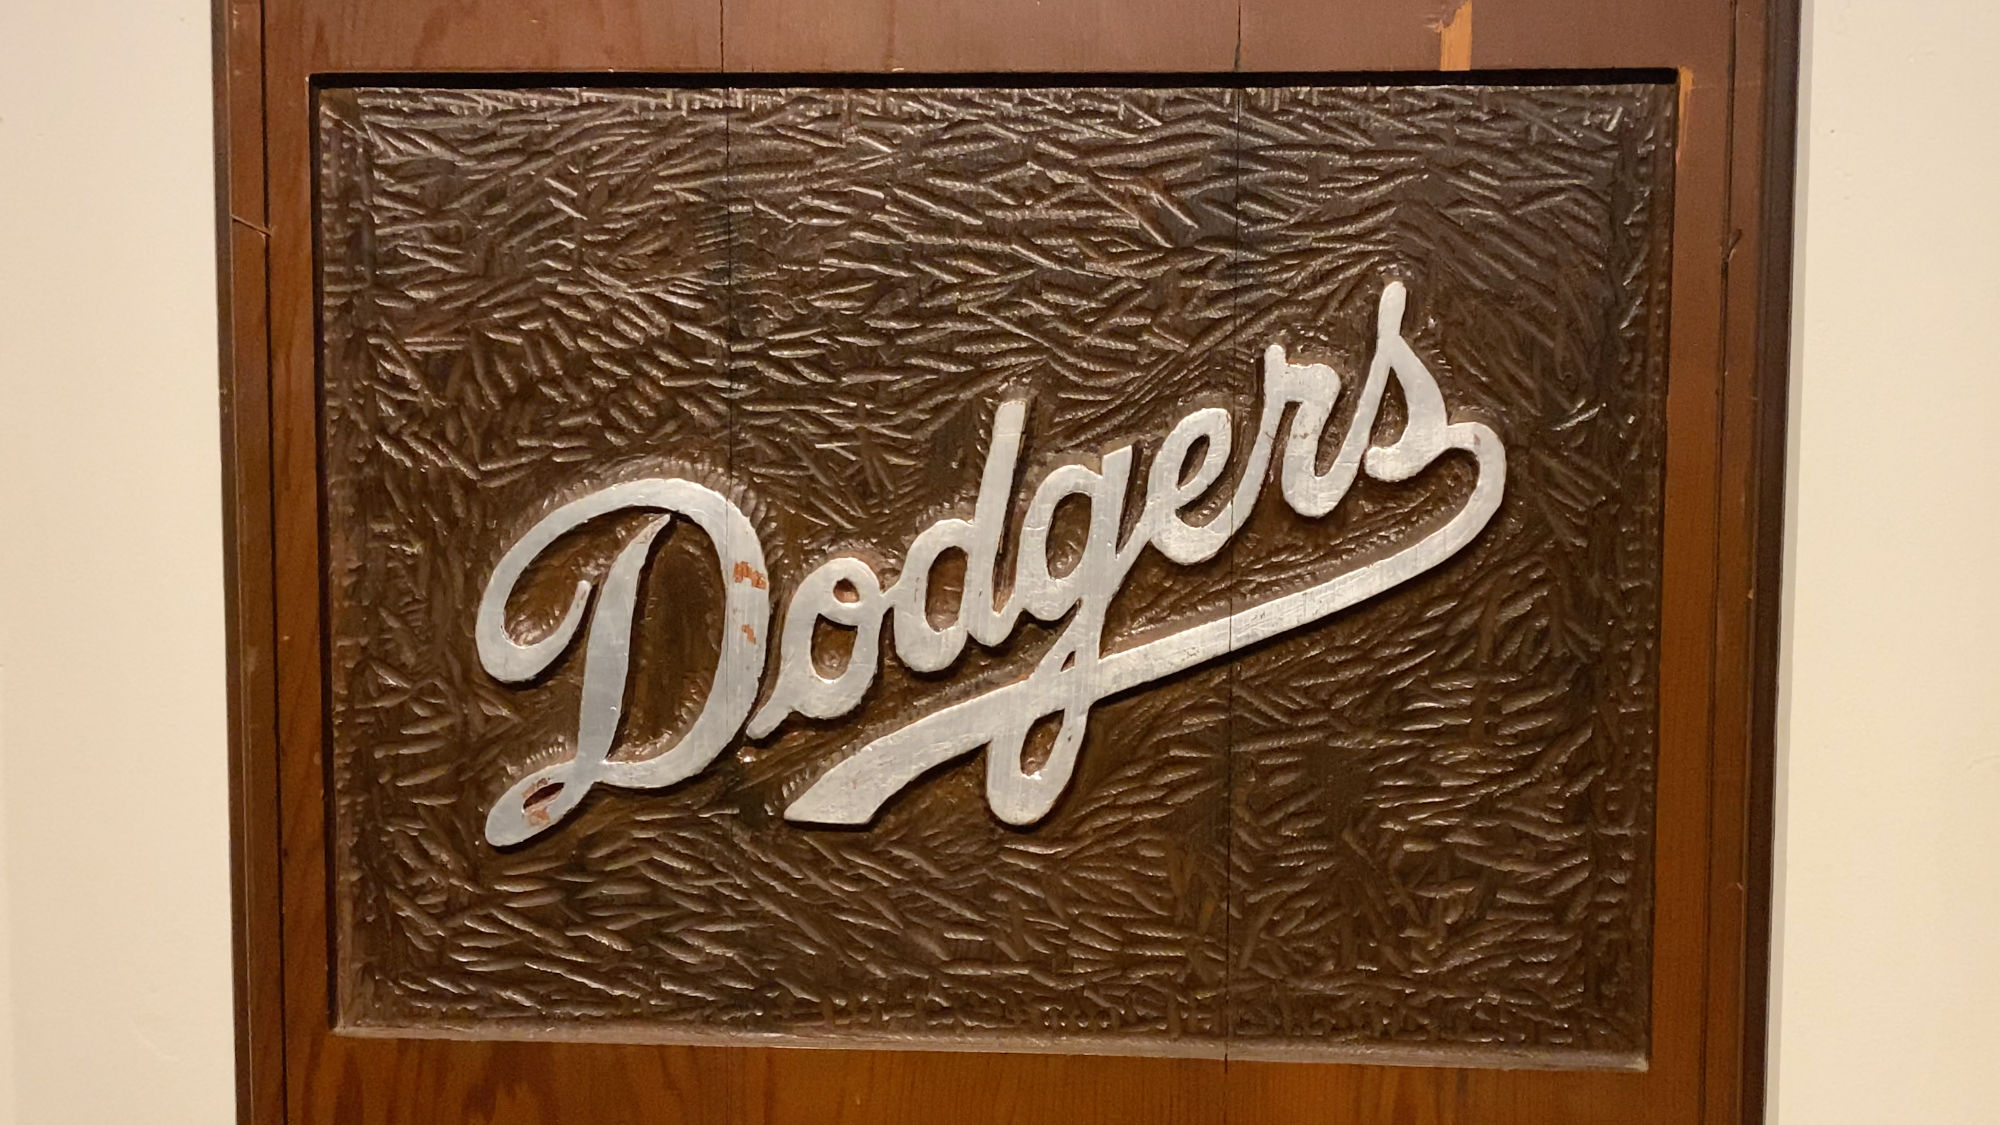 Dodgers Wood Carving